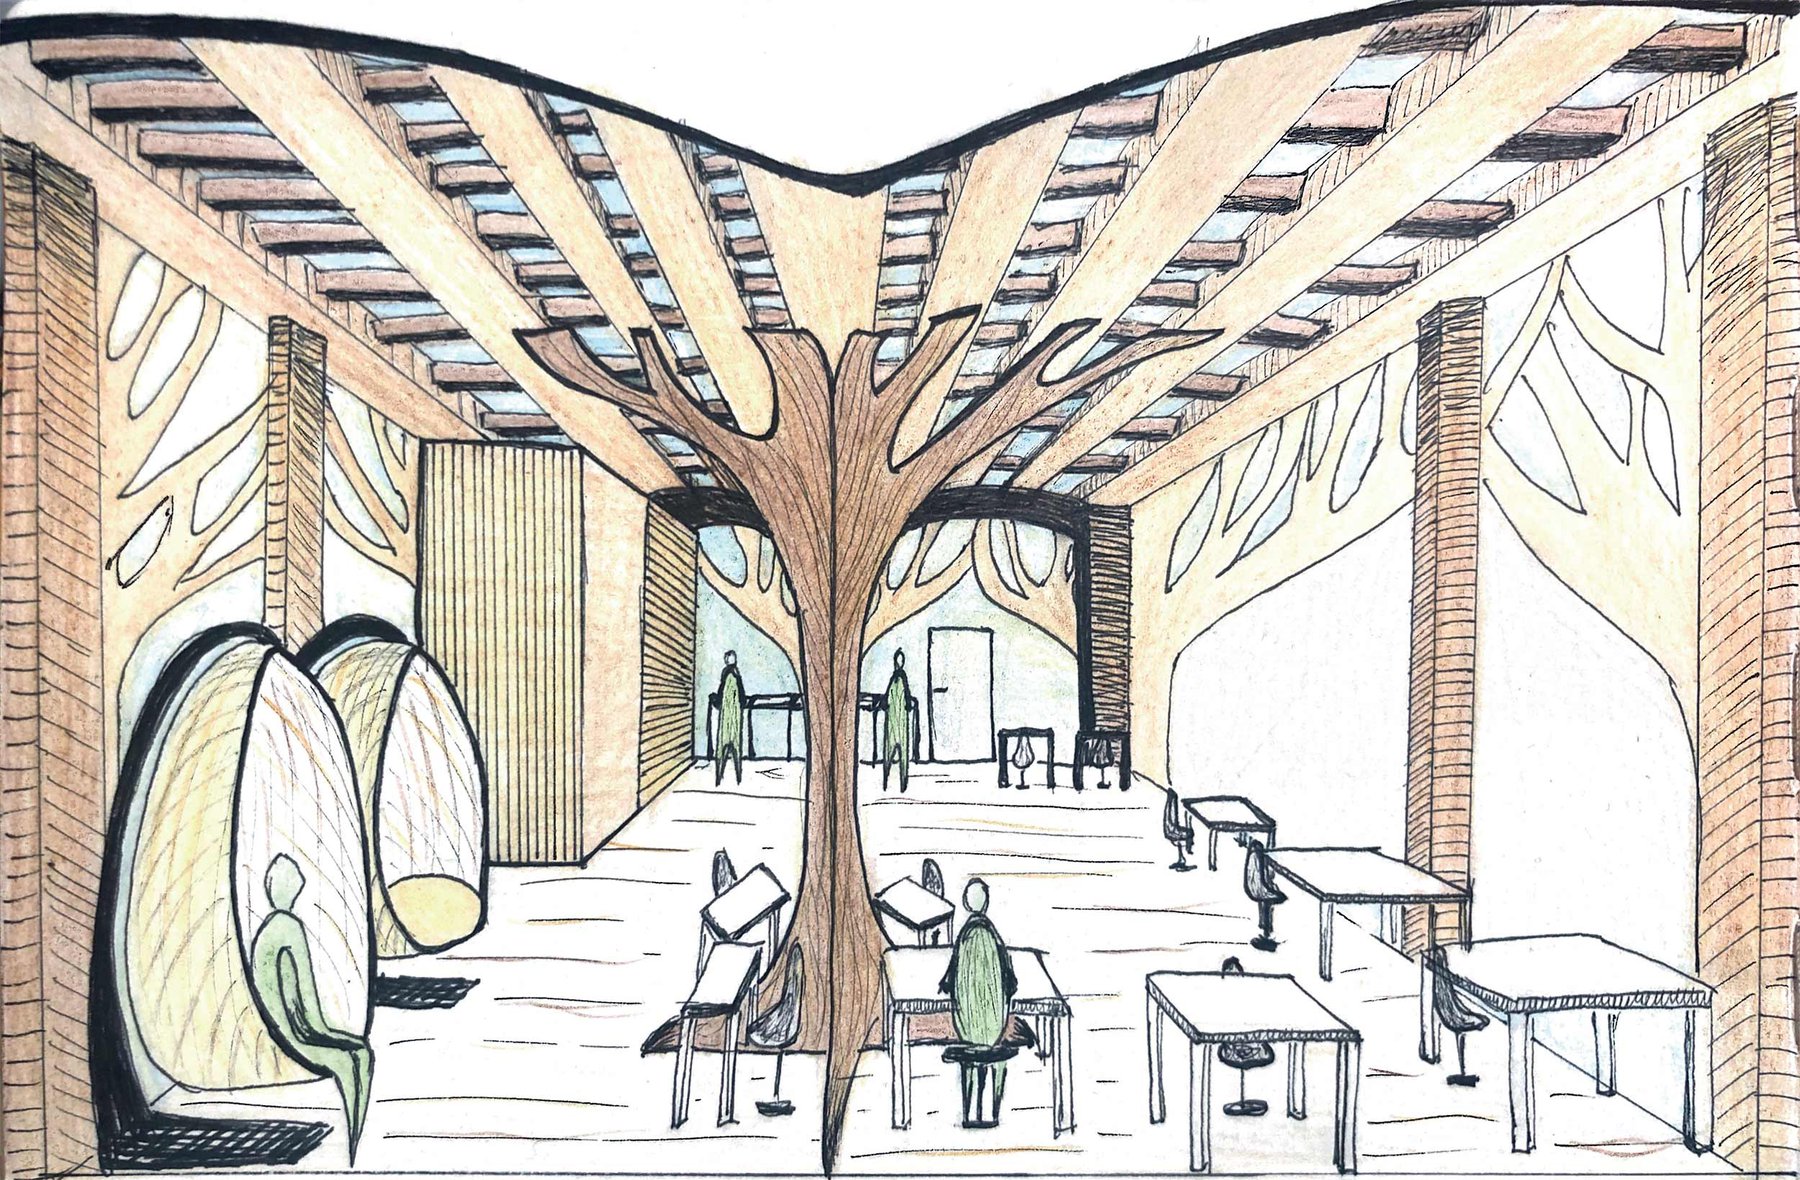 Hand drawn visual showing tree like structures and seating in a space